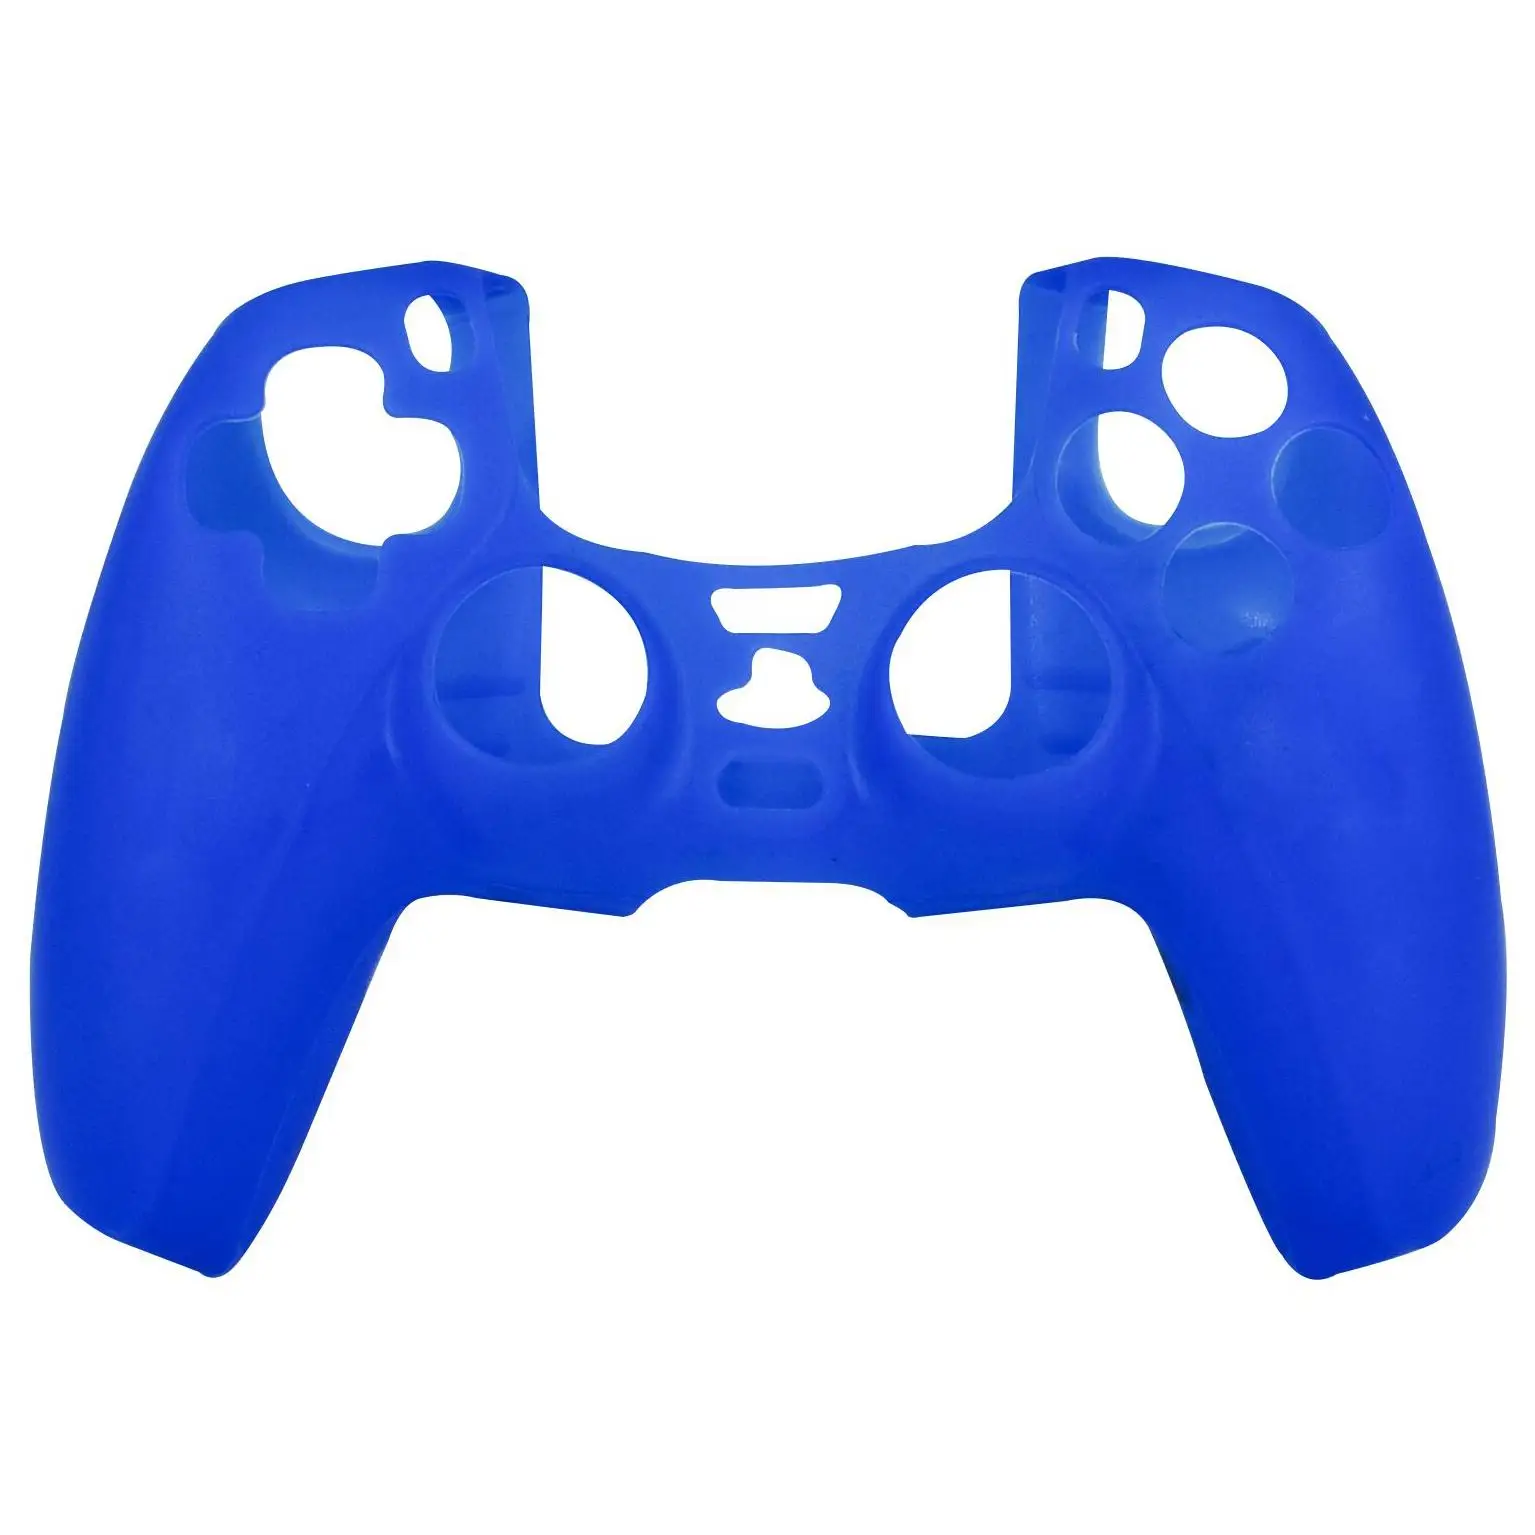 

New Arrive Soft Protective Shell Silicone Rubber Skin Cover Case For SONY Playstation 5 PS5 PS 5 Game Controller Joypad, Black,blue, black, clear